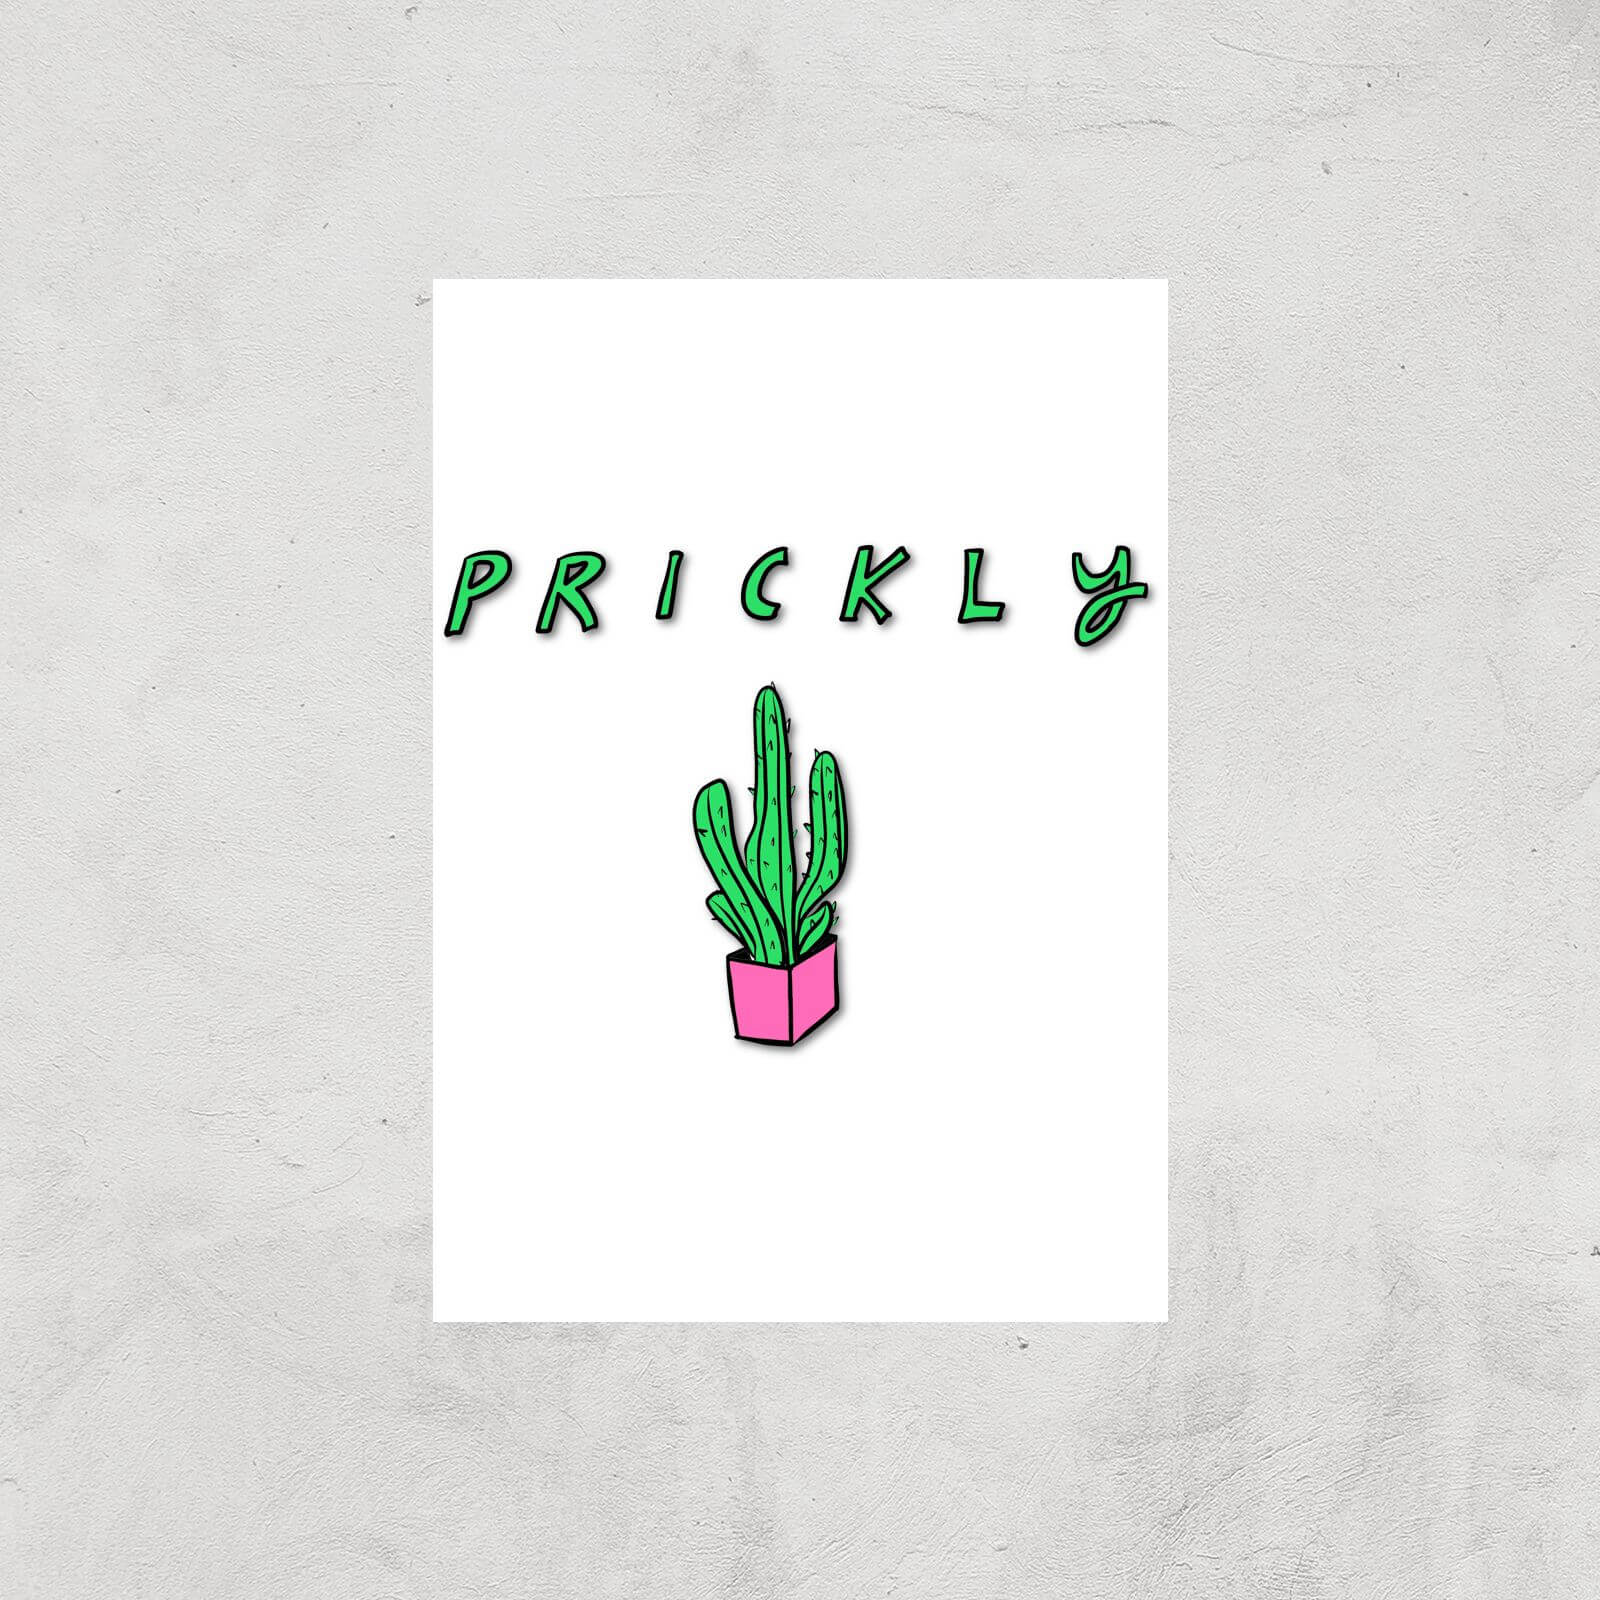 Rock On Ruby Prickly Art Print - A3 - Print Only